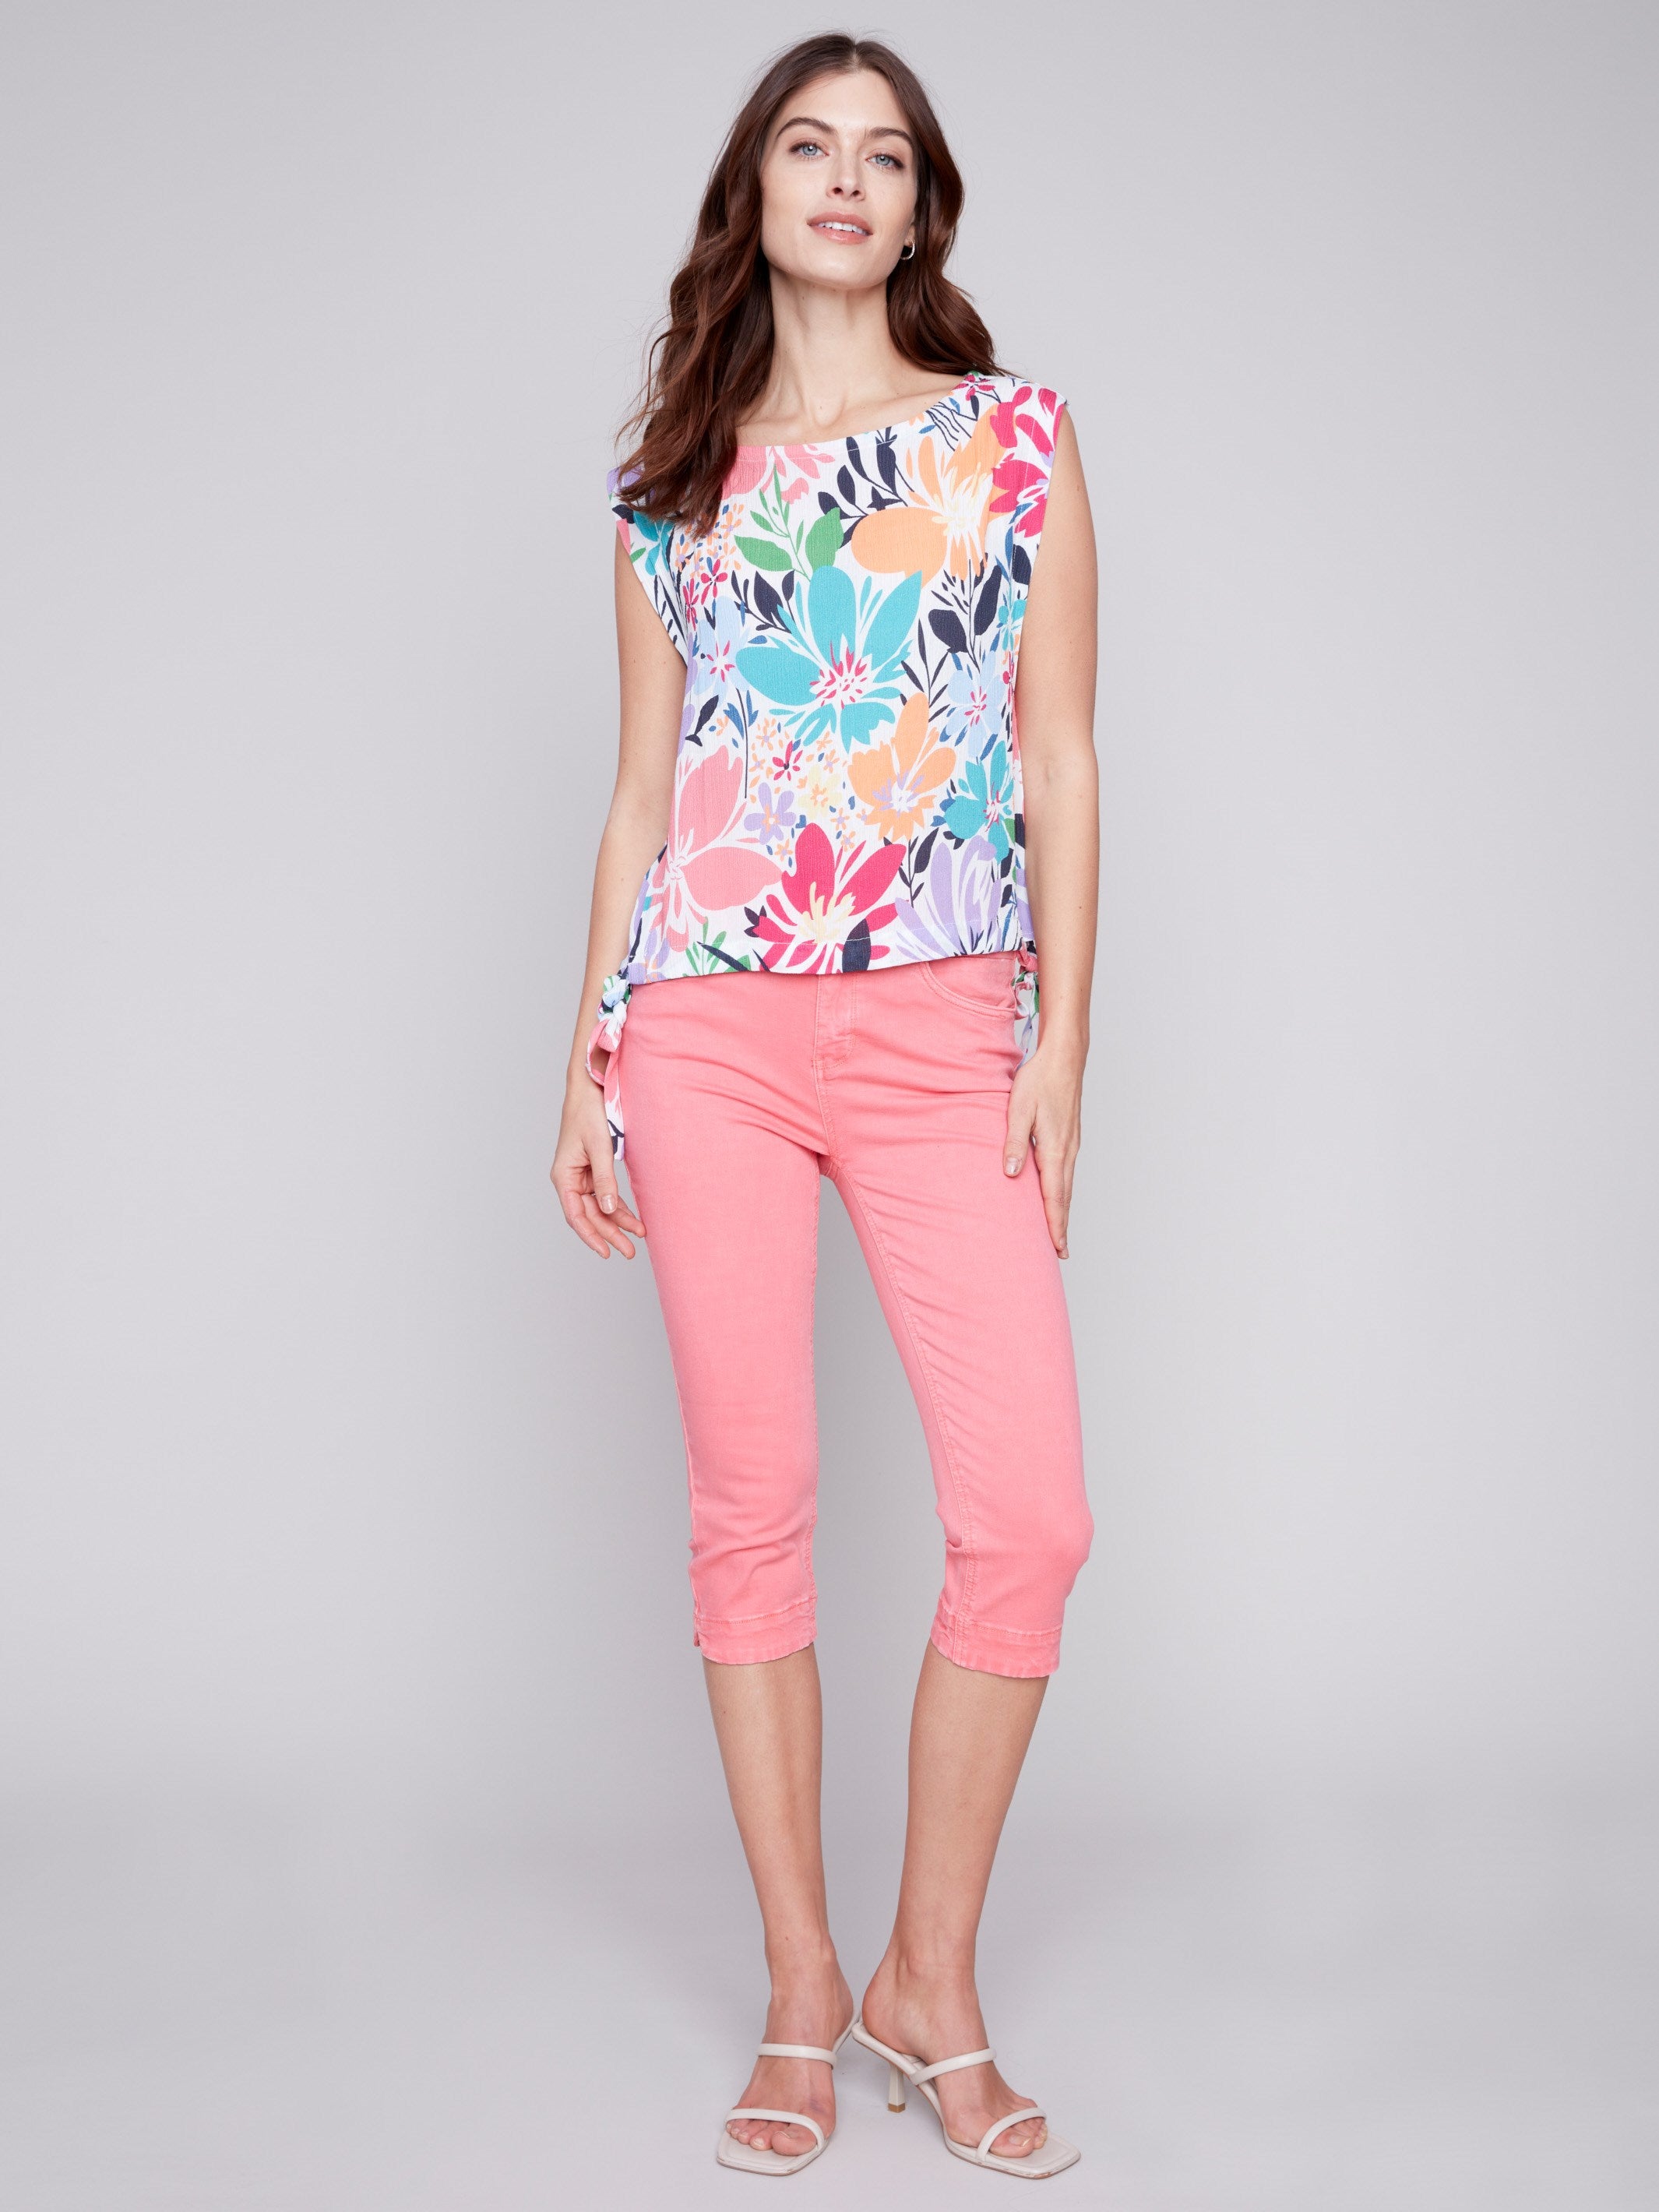 Charlie B Printed Sleeveless Blouse with Side Ties - Blossom - Image 3